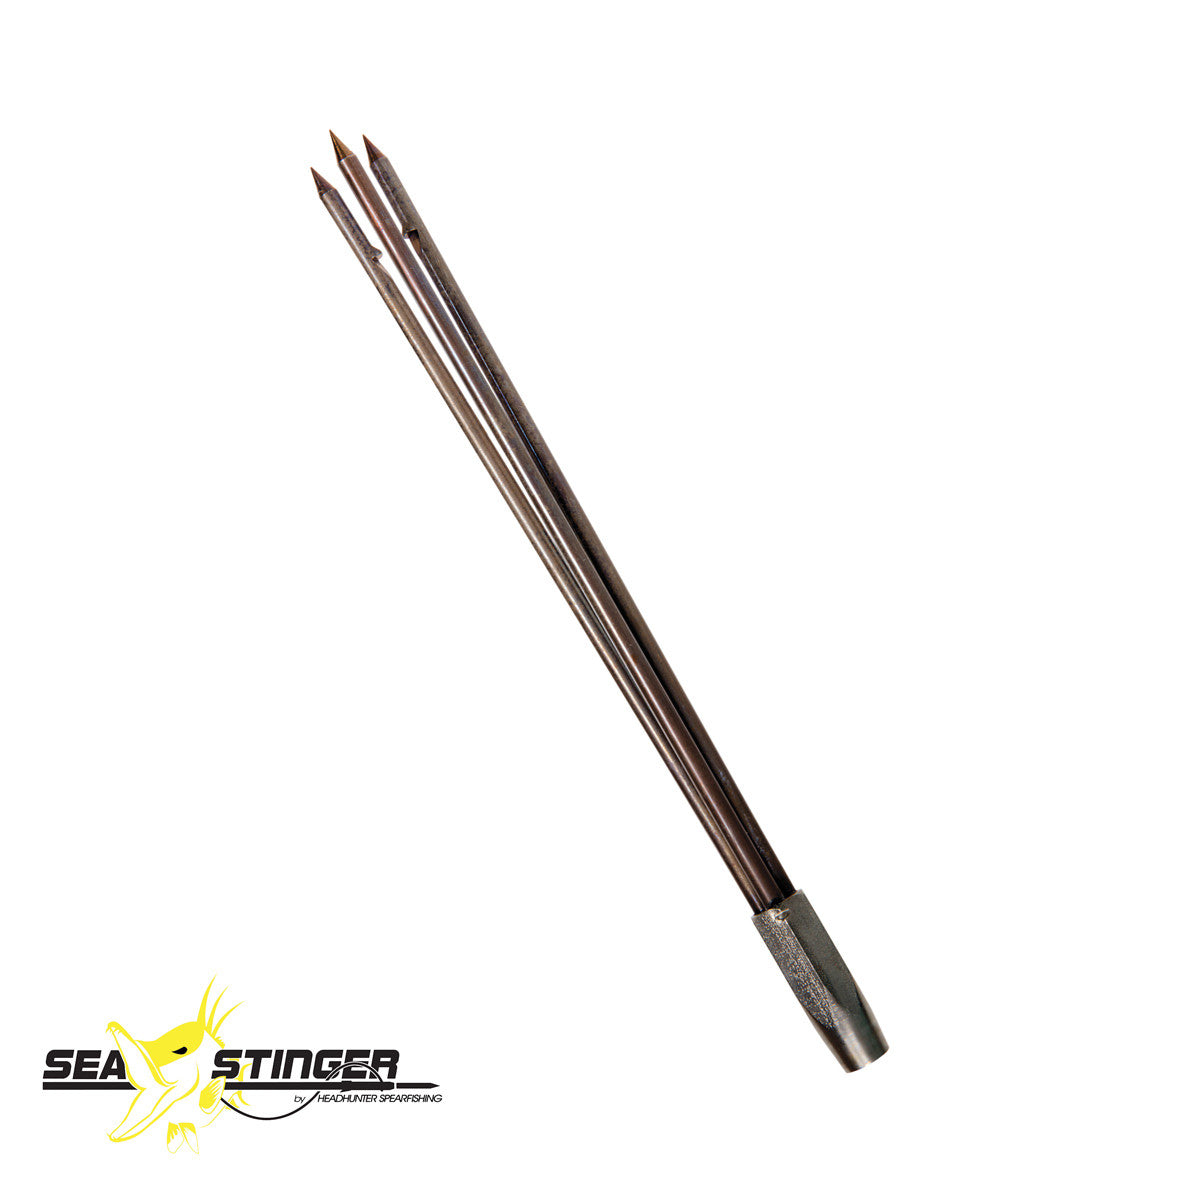 Spearfishing 12 Stainless Steel Pole Spear Tip 3 Prong Head Paralyzer